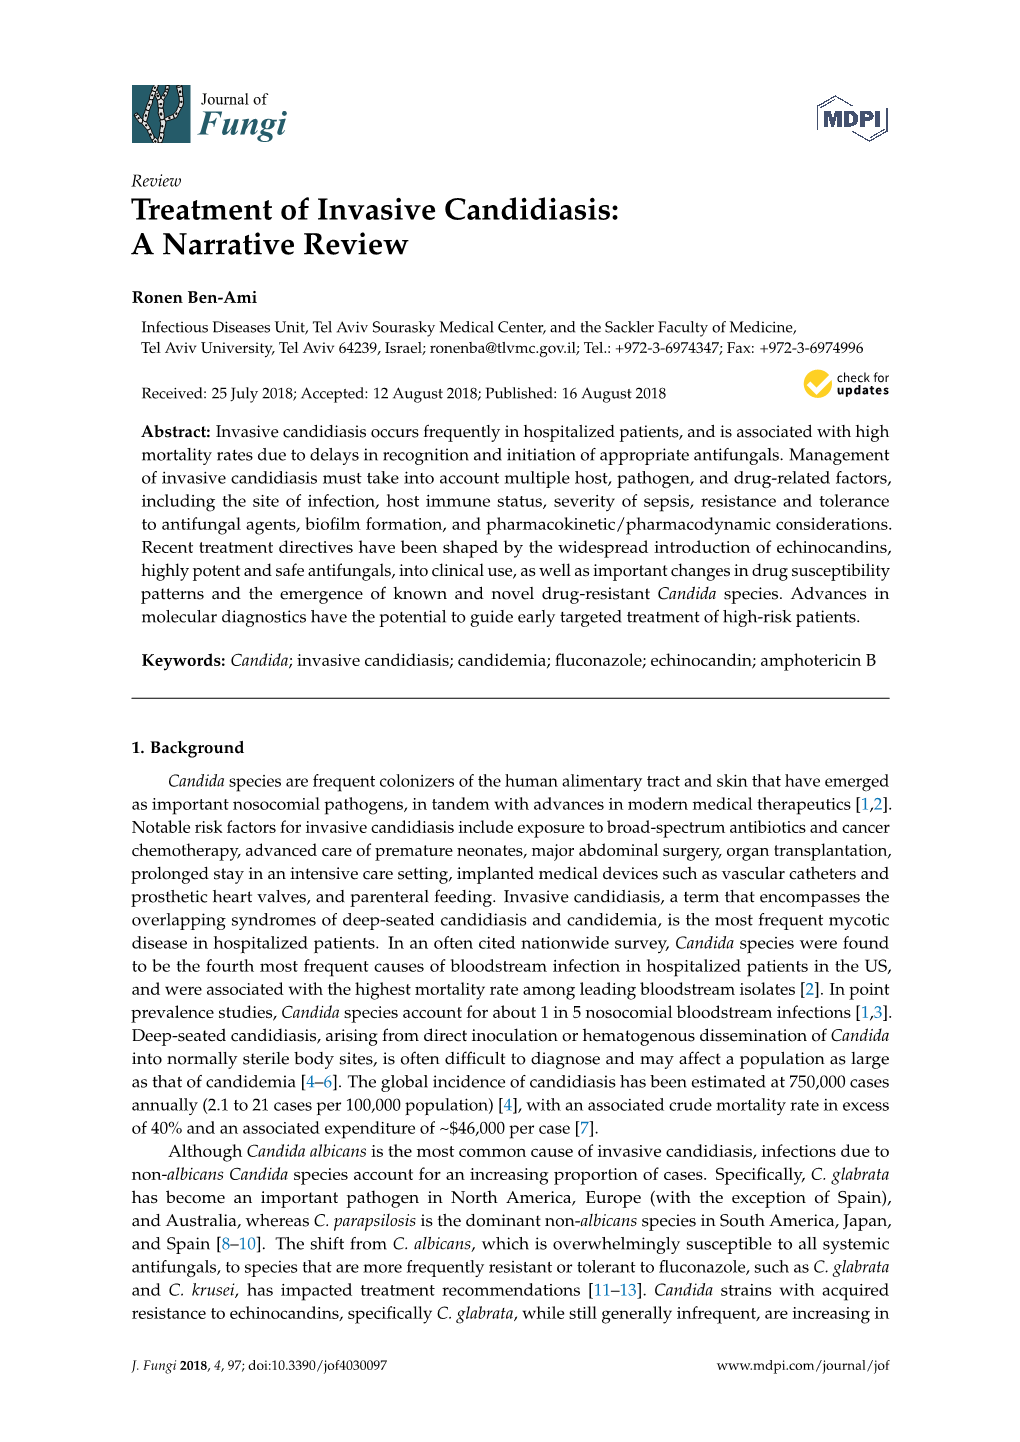 Treatment of Invasive Candidiasis: a Narrative Review